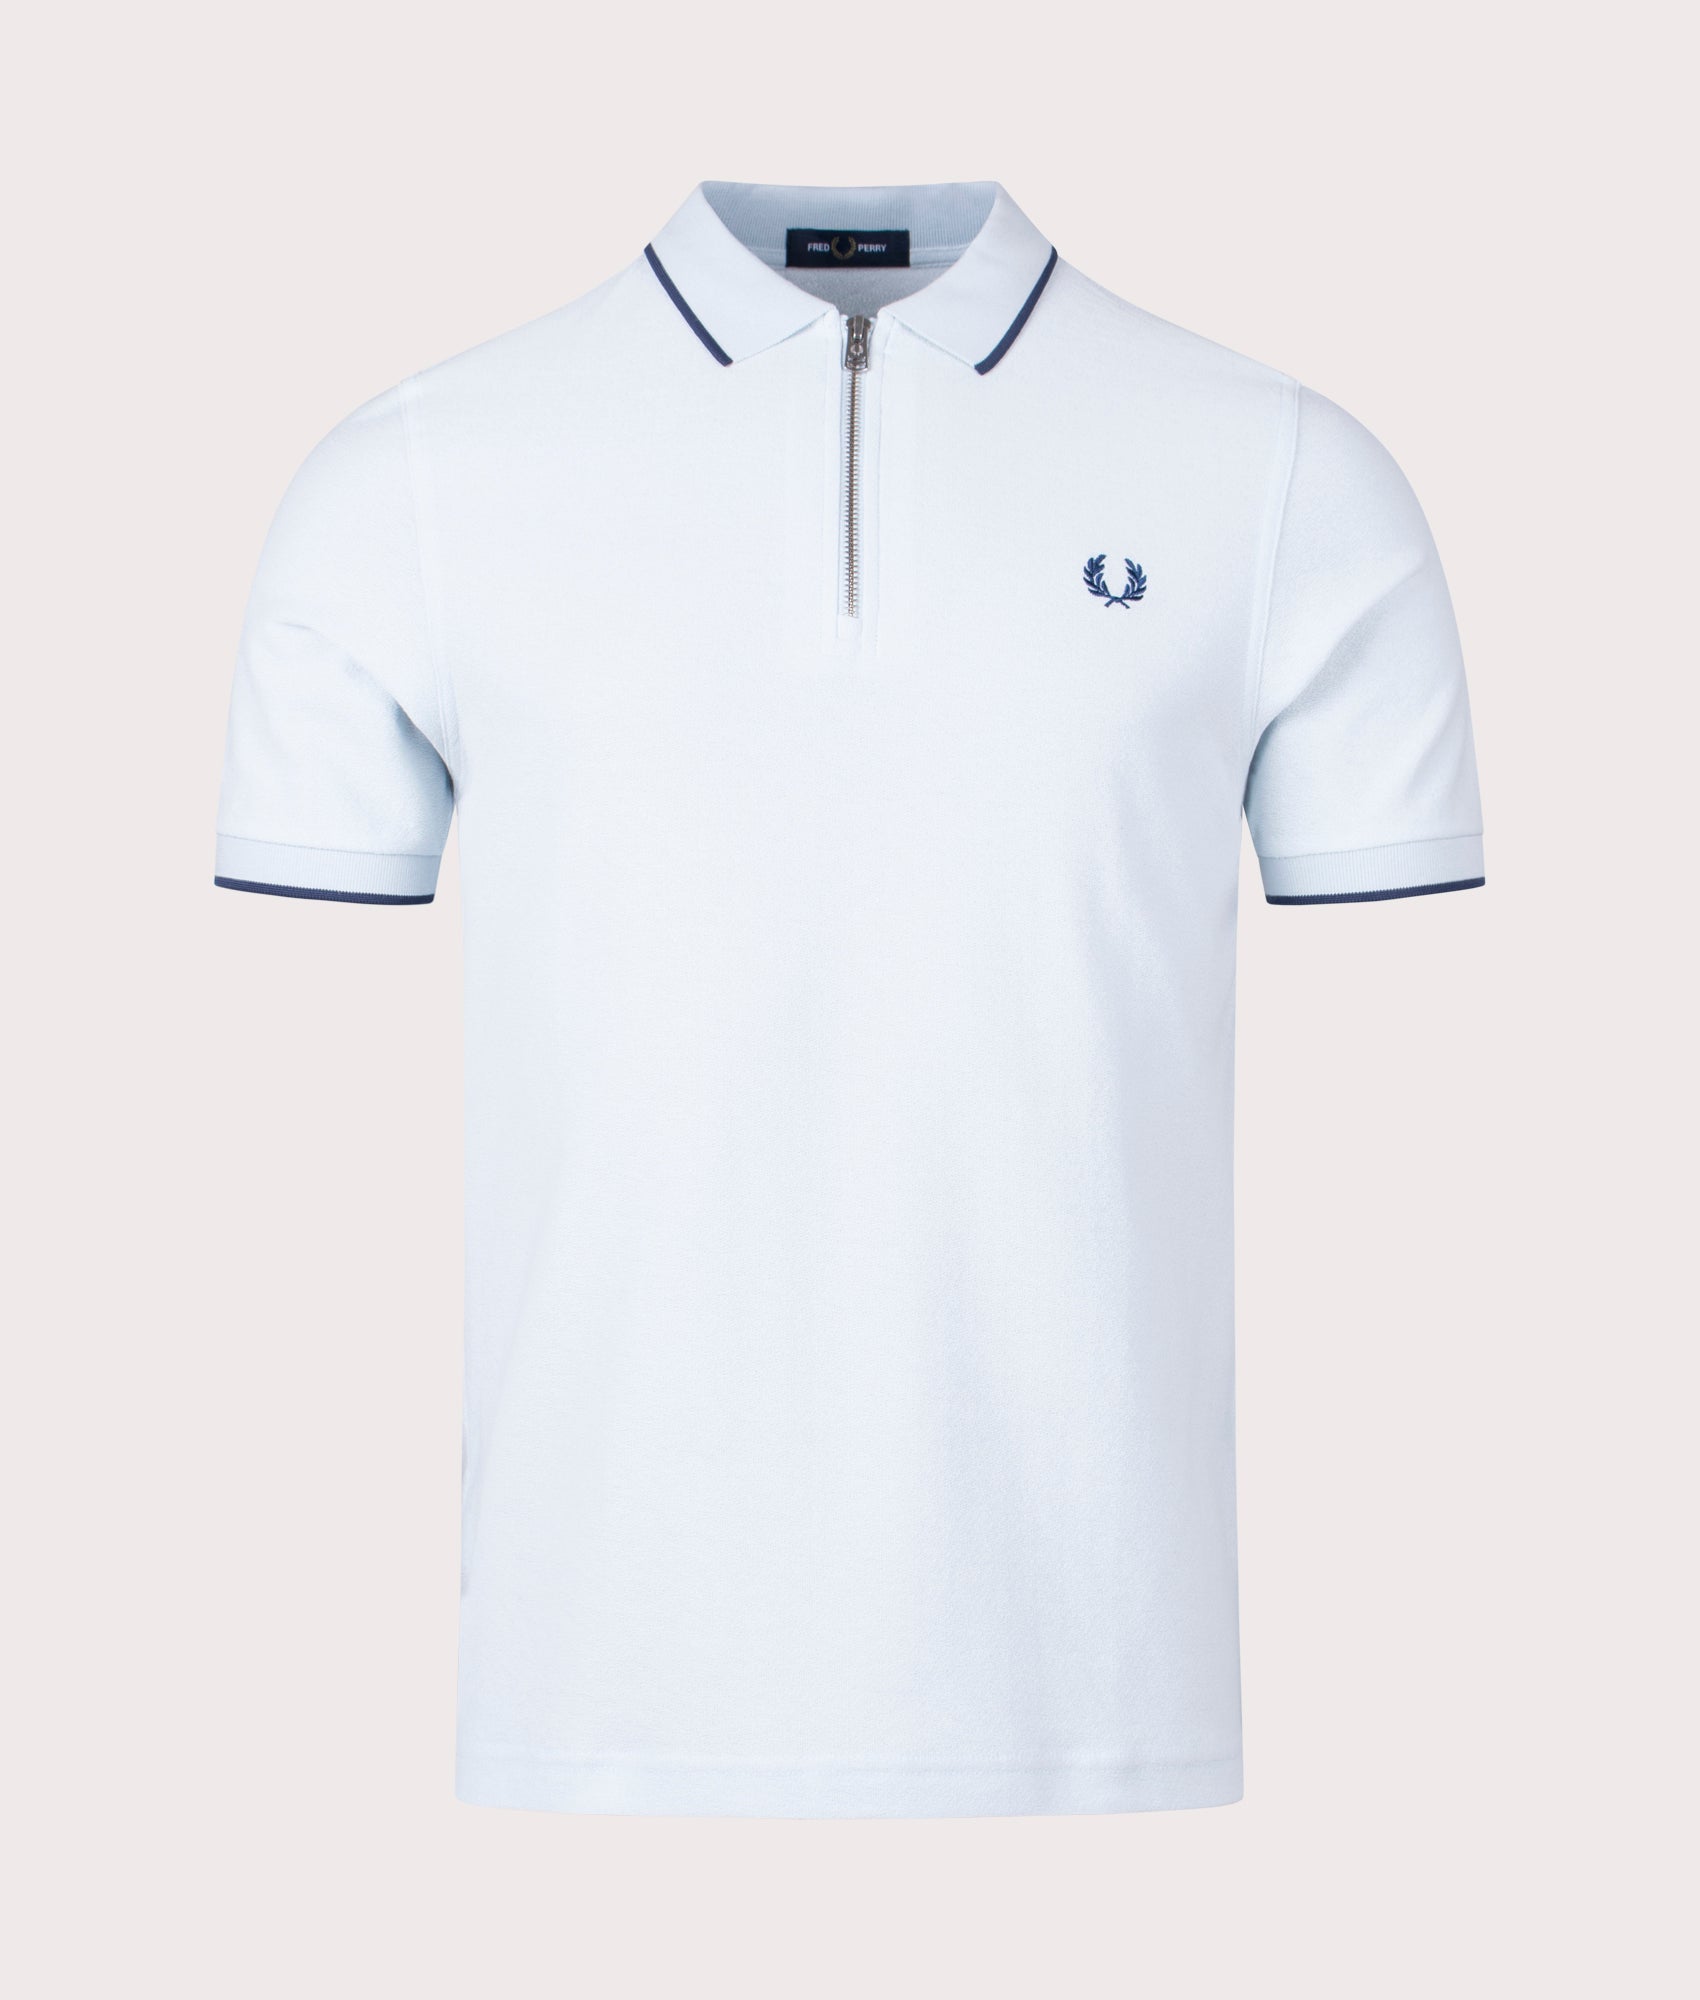 Fred Perry Mens Crepe Pique Zip Neck Polo Shirt - Colour: R30 Light Ice - Size: XL